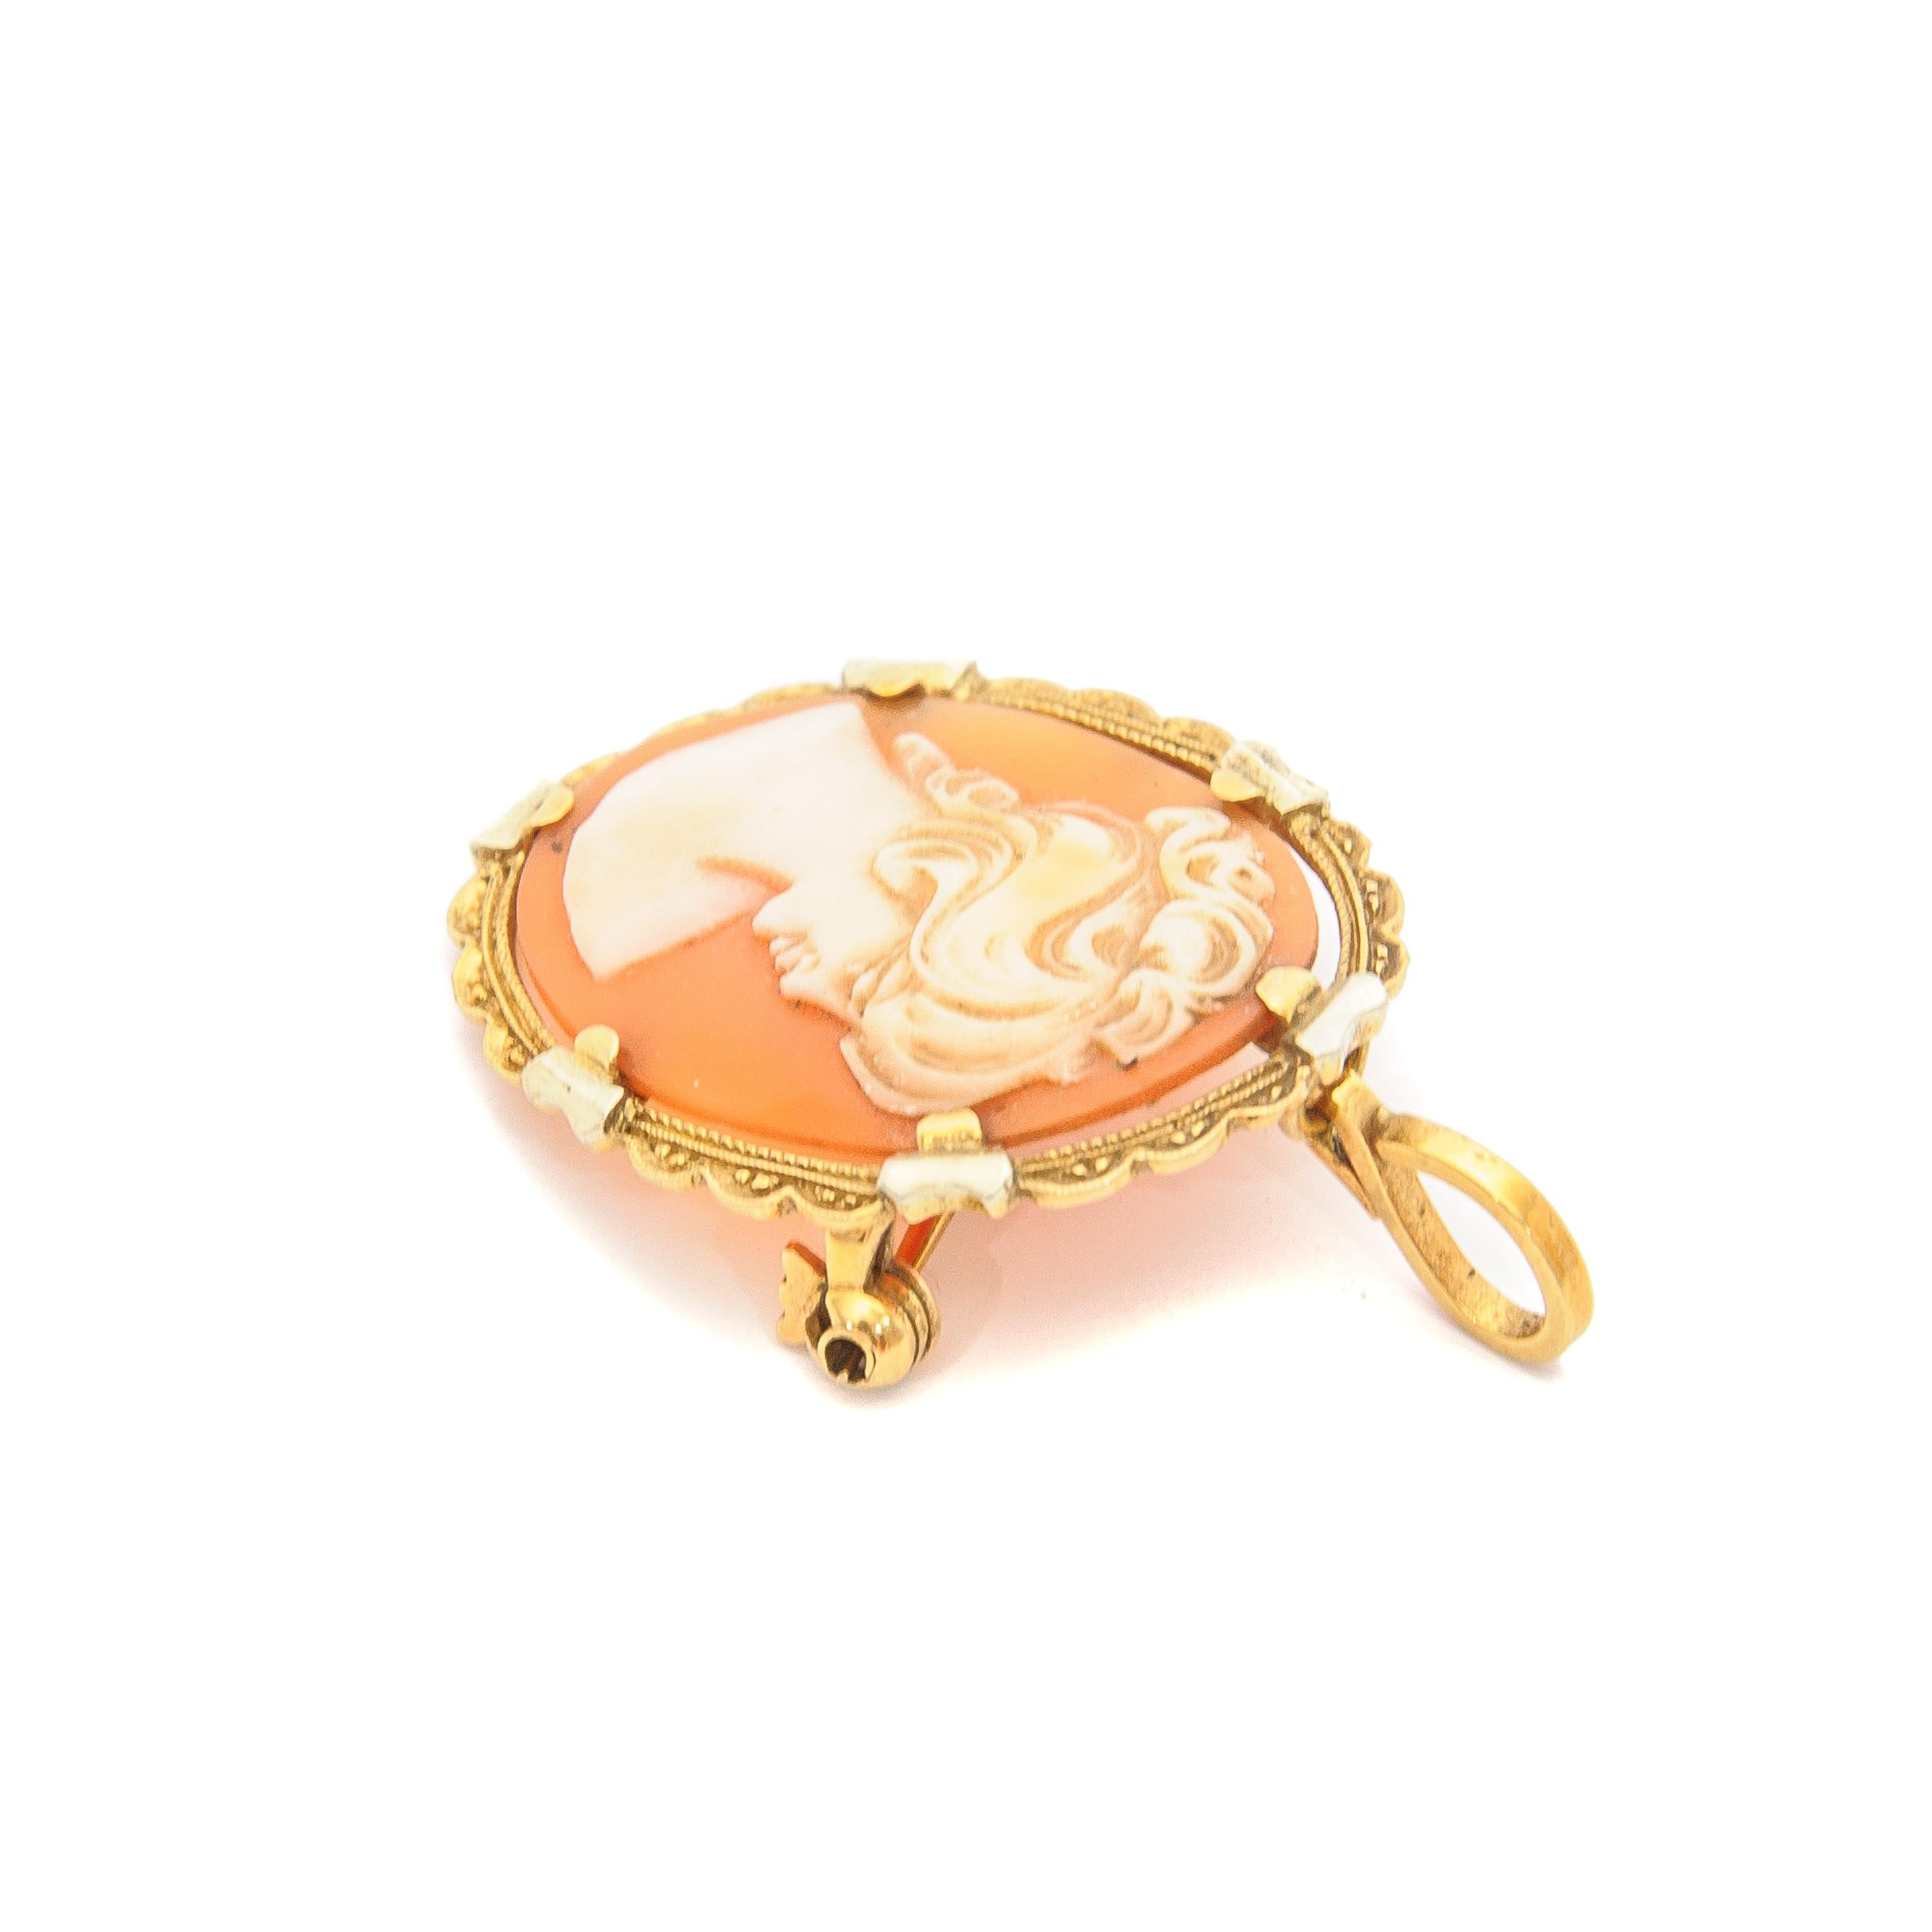 A mid-century vintage cameo brooch pendant made of shell and gold. The shell cameo is beautifully carved into this female silhouette. The color of the cameo is pinkish, slightly orangish and set in a 18 karat yellow frame. The 18 karat gold mounting